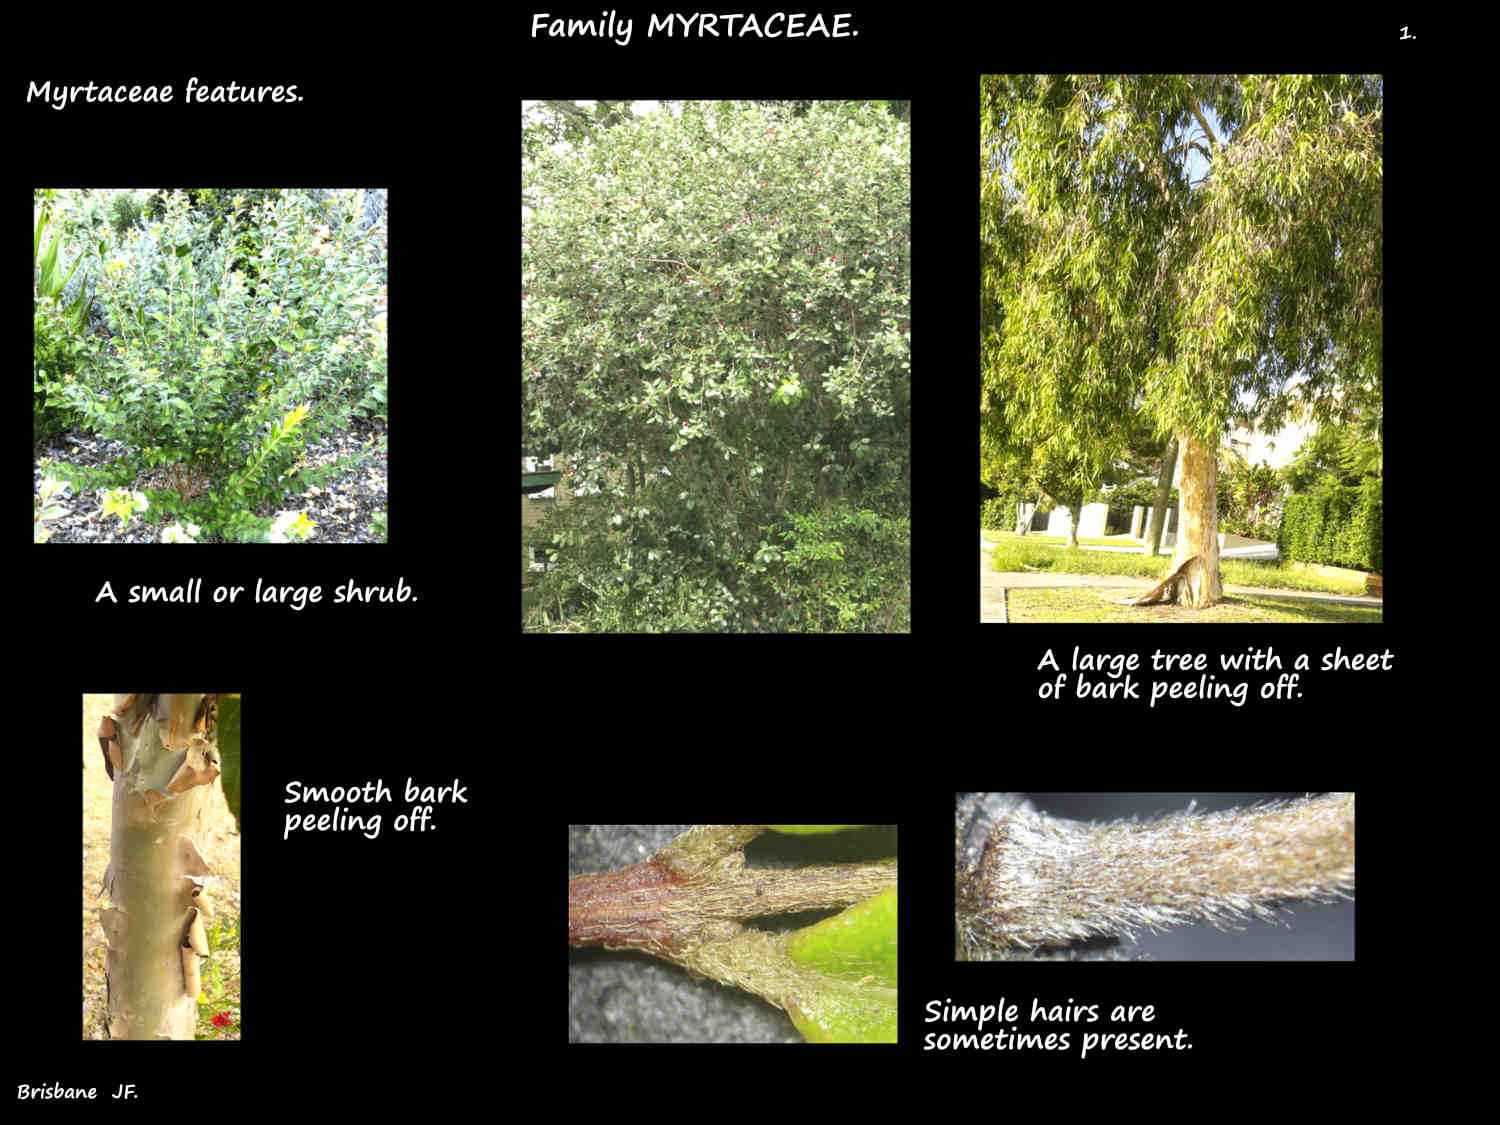 1 Myrtaceae are mostly shrubs & trees